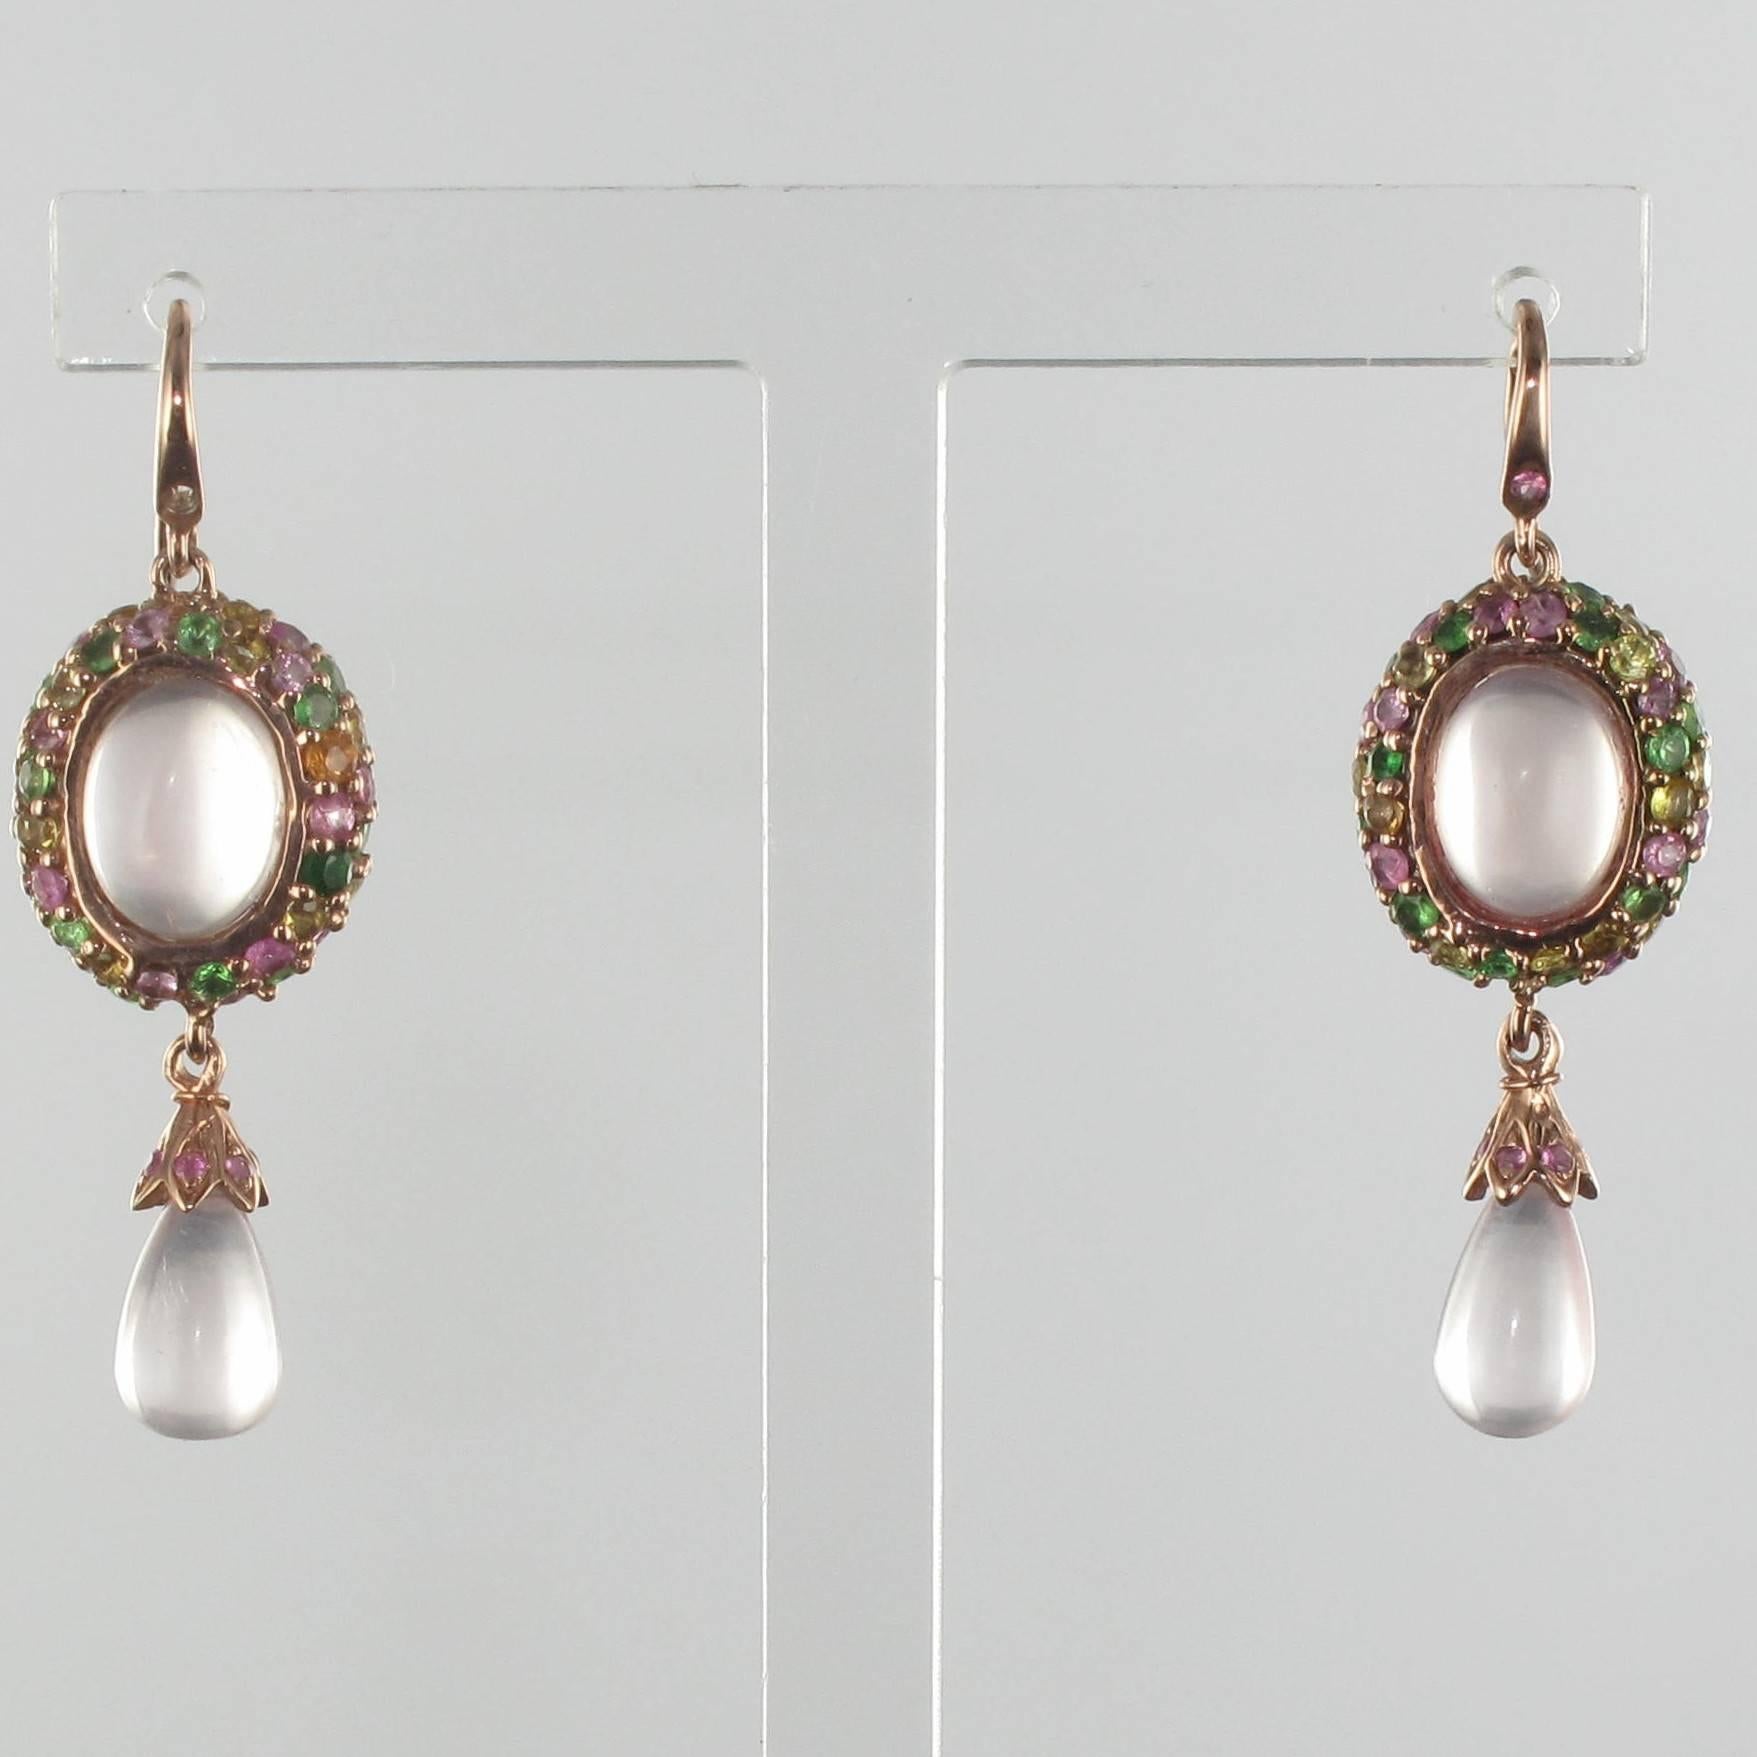 For pierced ears.
Pair of dangle earrings in silver 925 with rose rhodium.

Each silver earring consists of a bezel set oval design with a rose quartz cabochon centrepiece surrounded with alternating yellow sapphires, pink sapphires and green